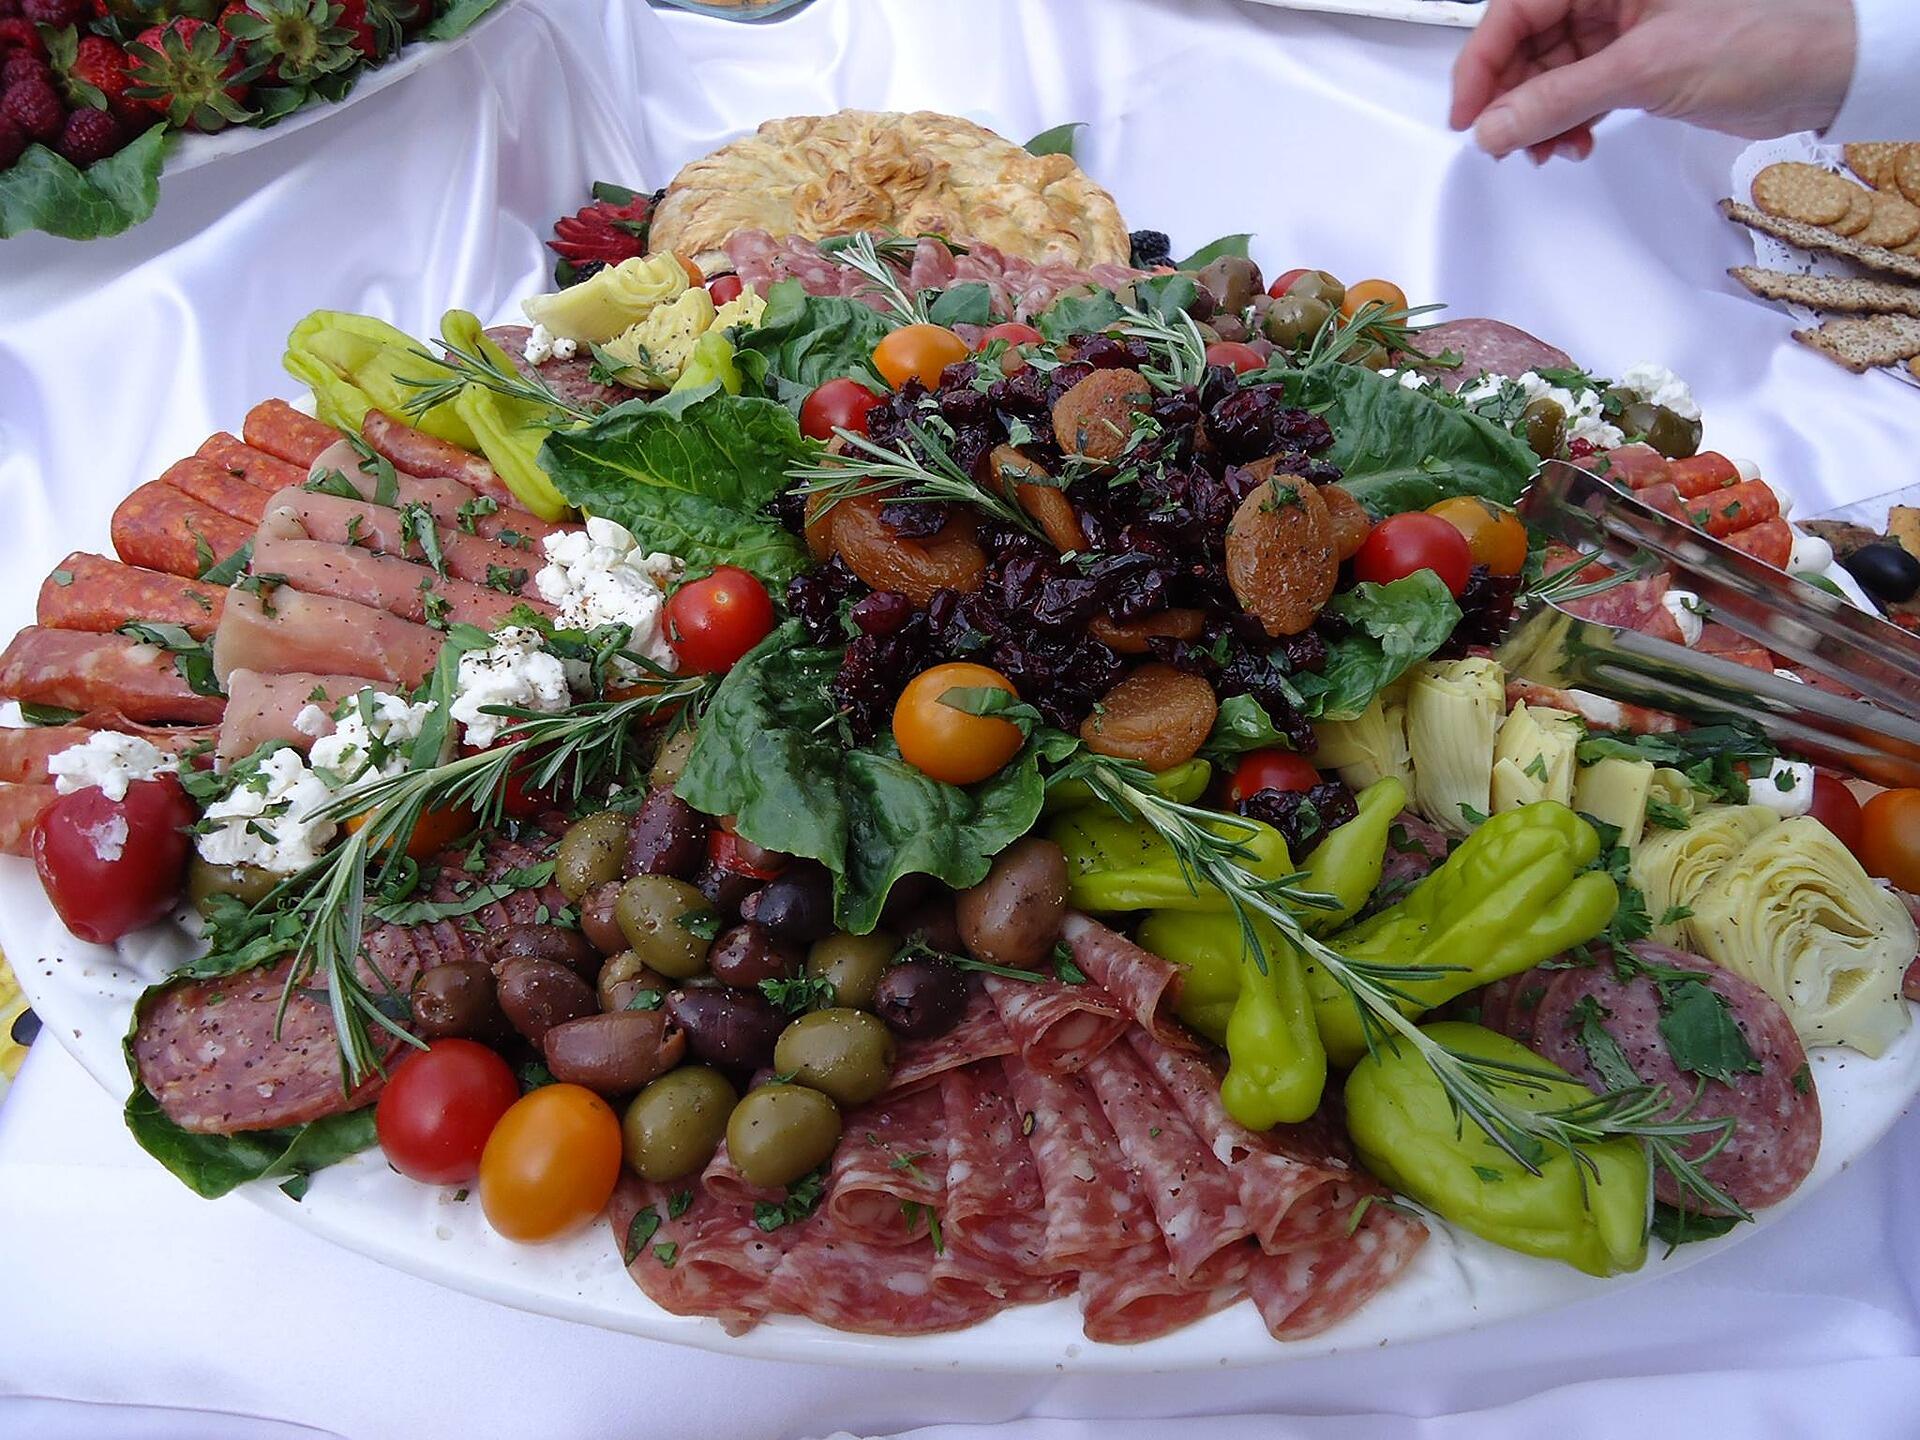 A custom prepared catered meat, vegetable, and cheese tray